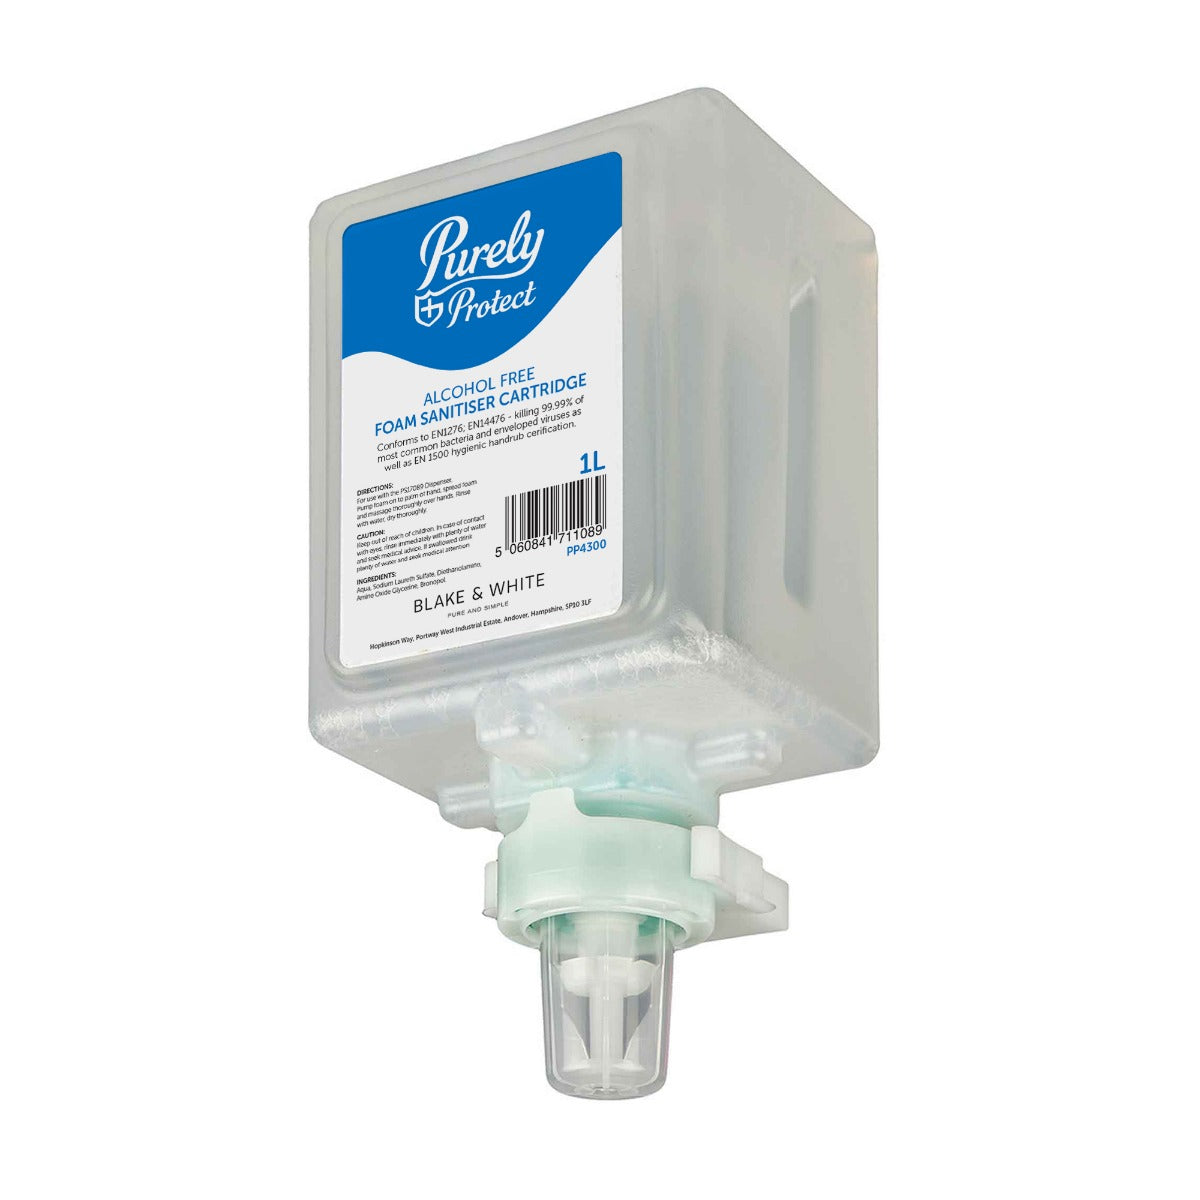 Purely Protect Alcohol Free Foam Sanitiser Cartridges 6 x 1L